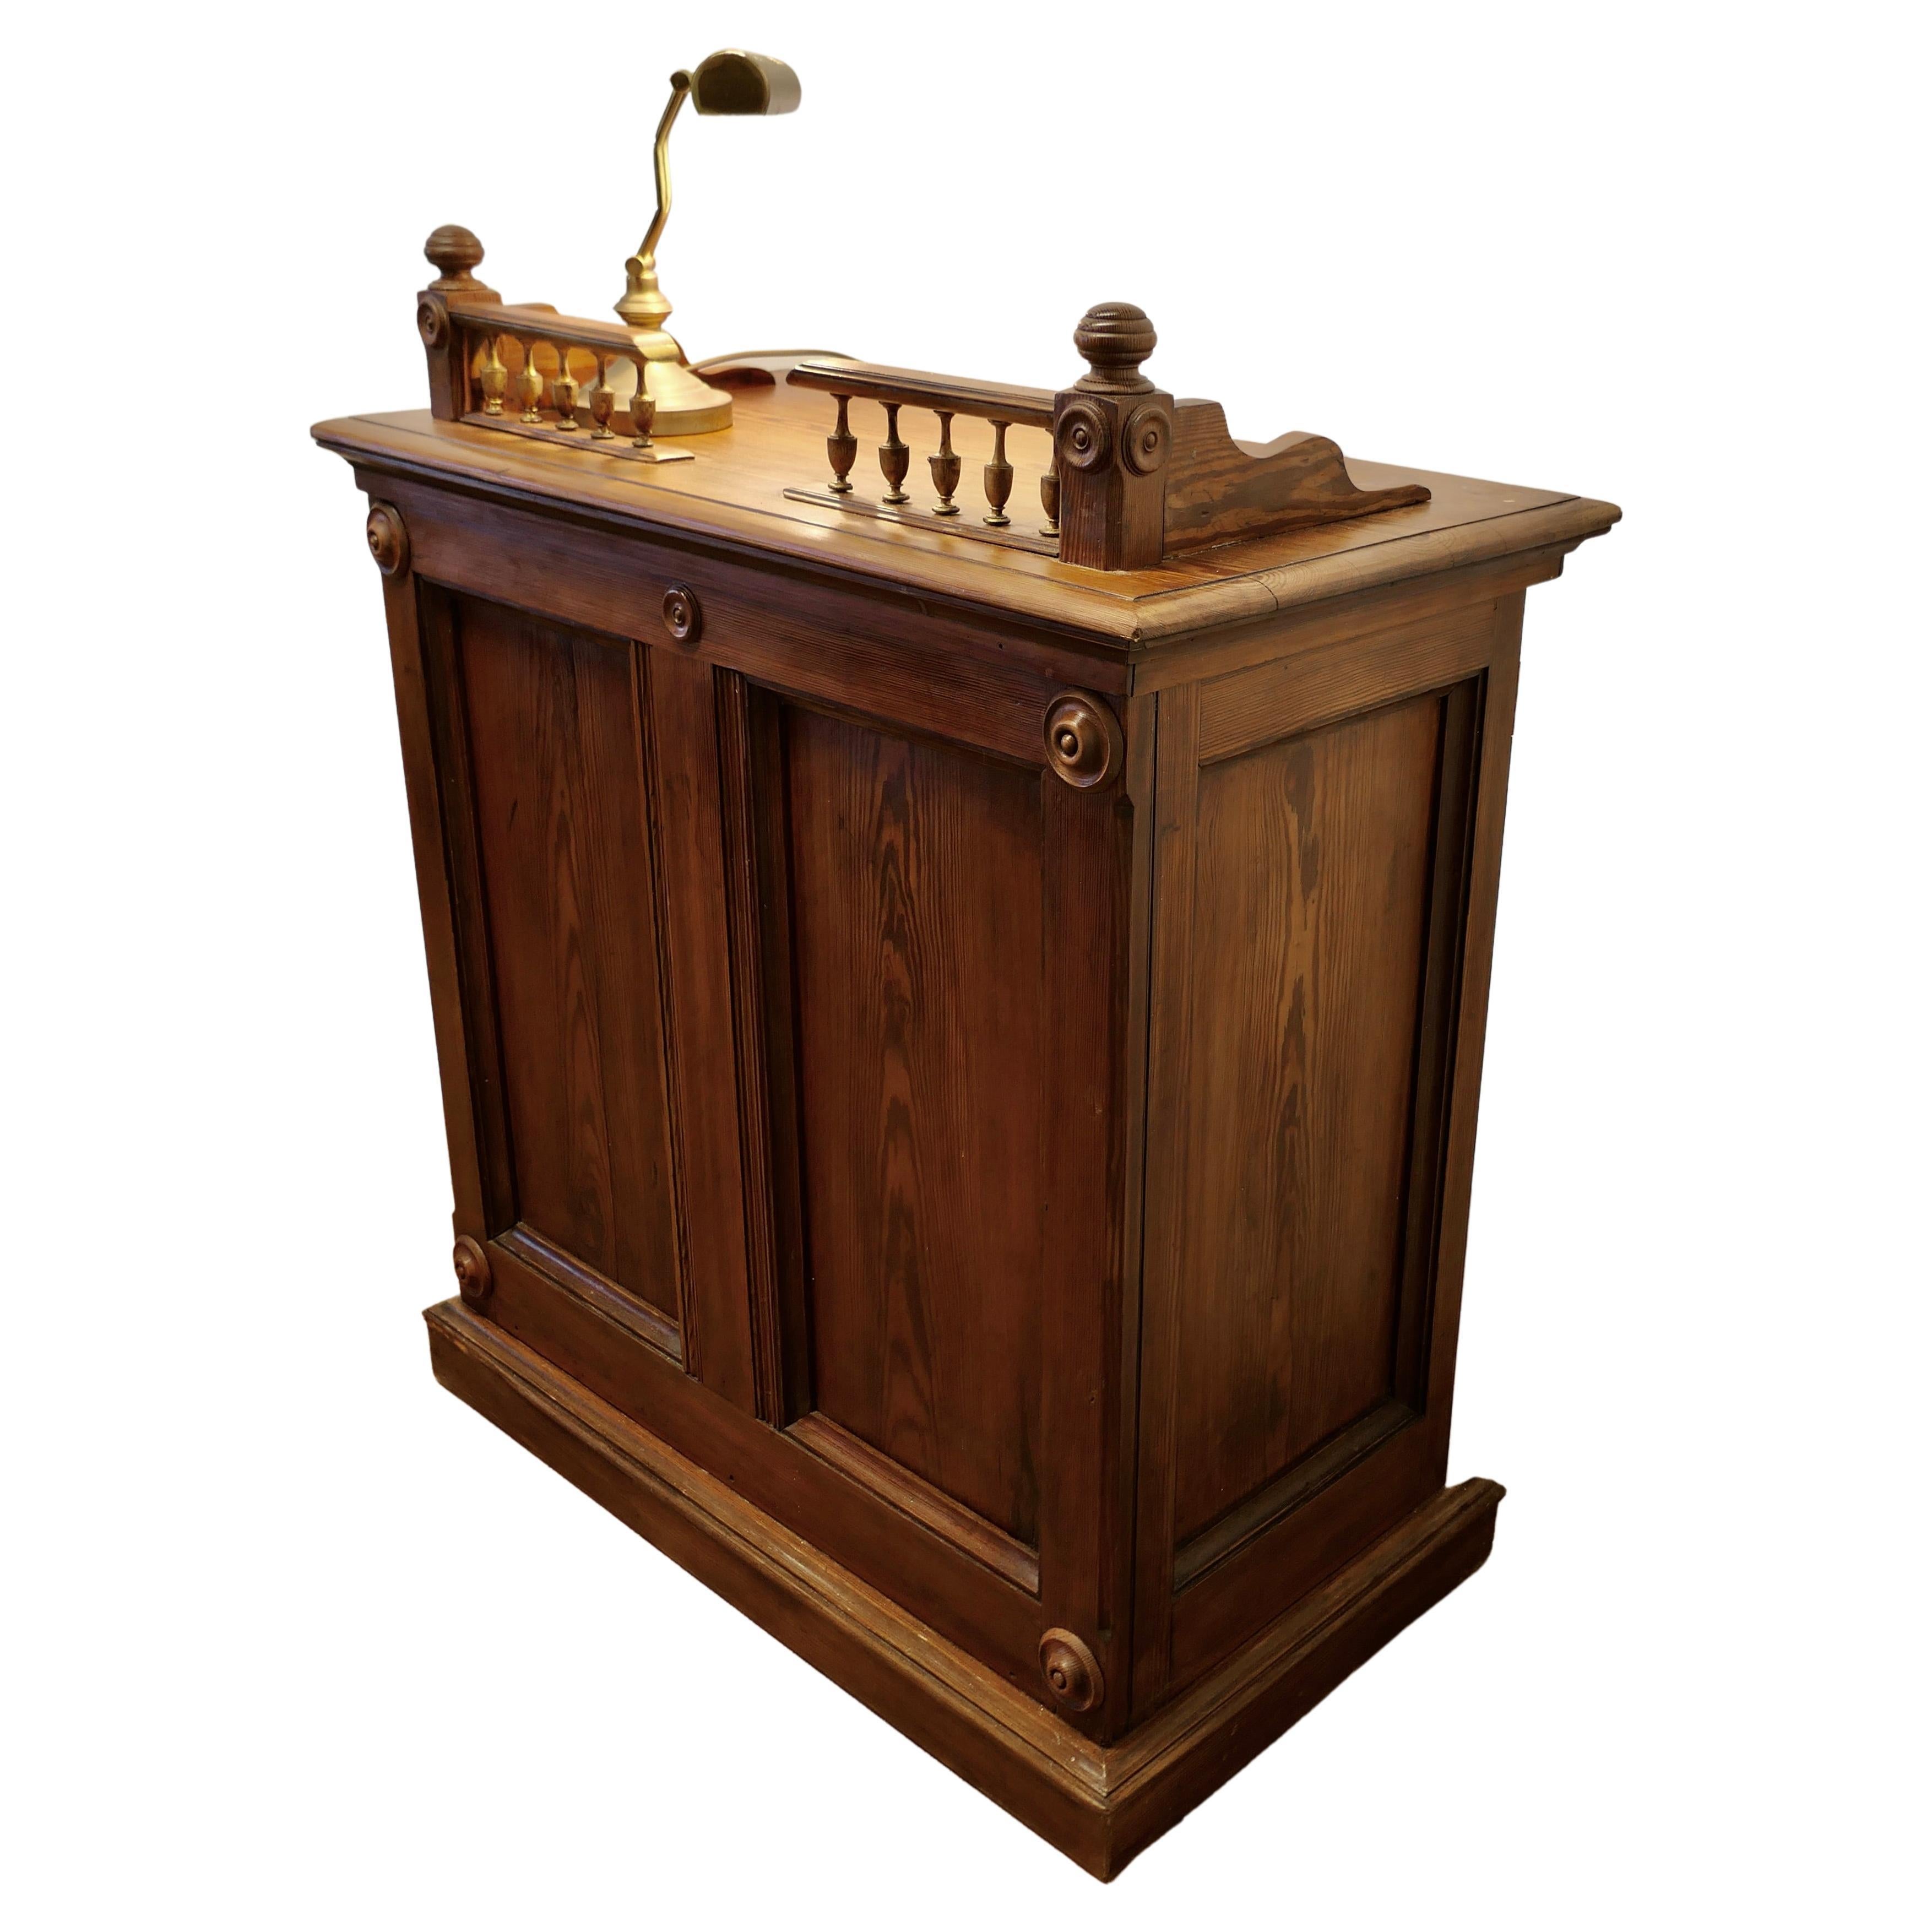 Pitch Pine Hotel Restaurant Reception Hostess Greeting Station  For Sale